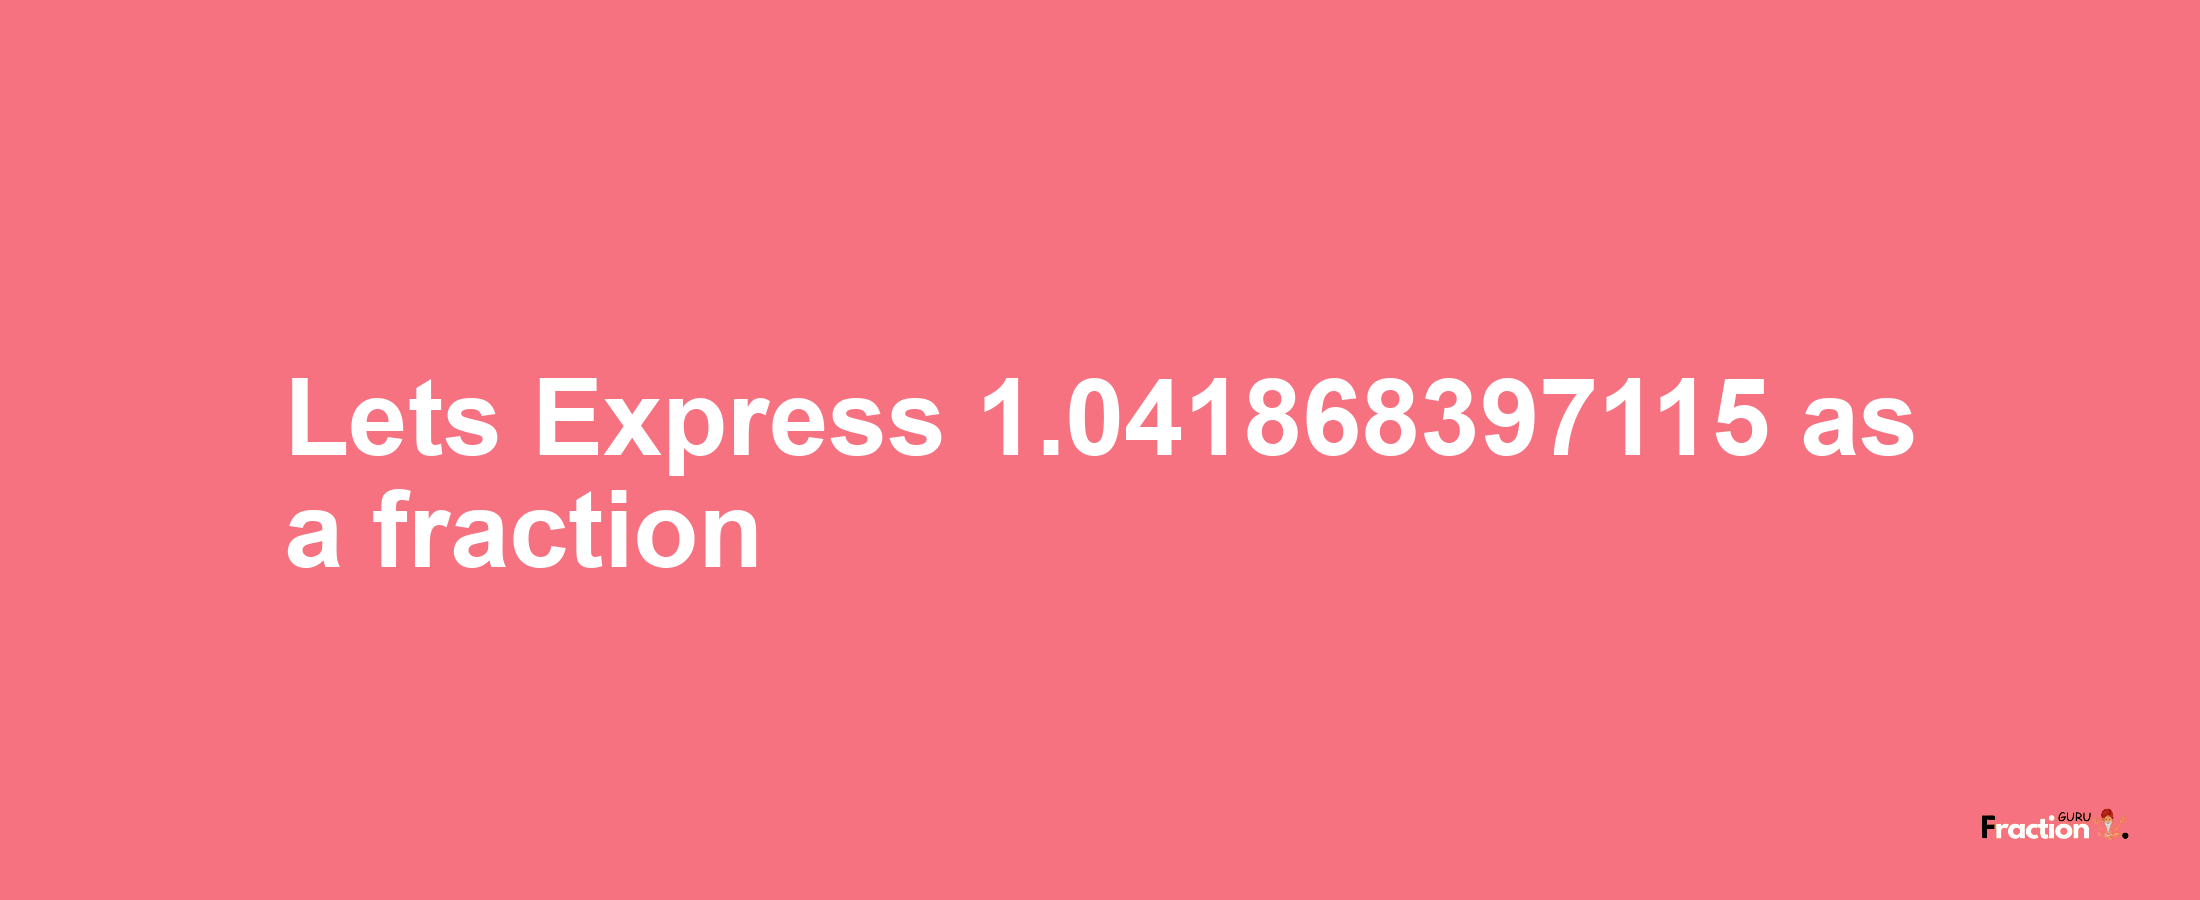 Lets Express 1.041868397115 as afraction